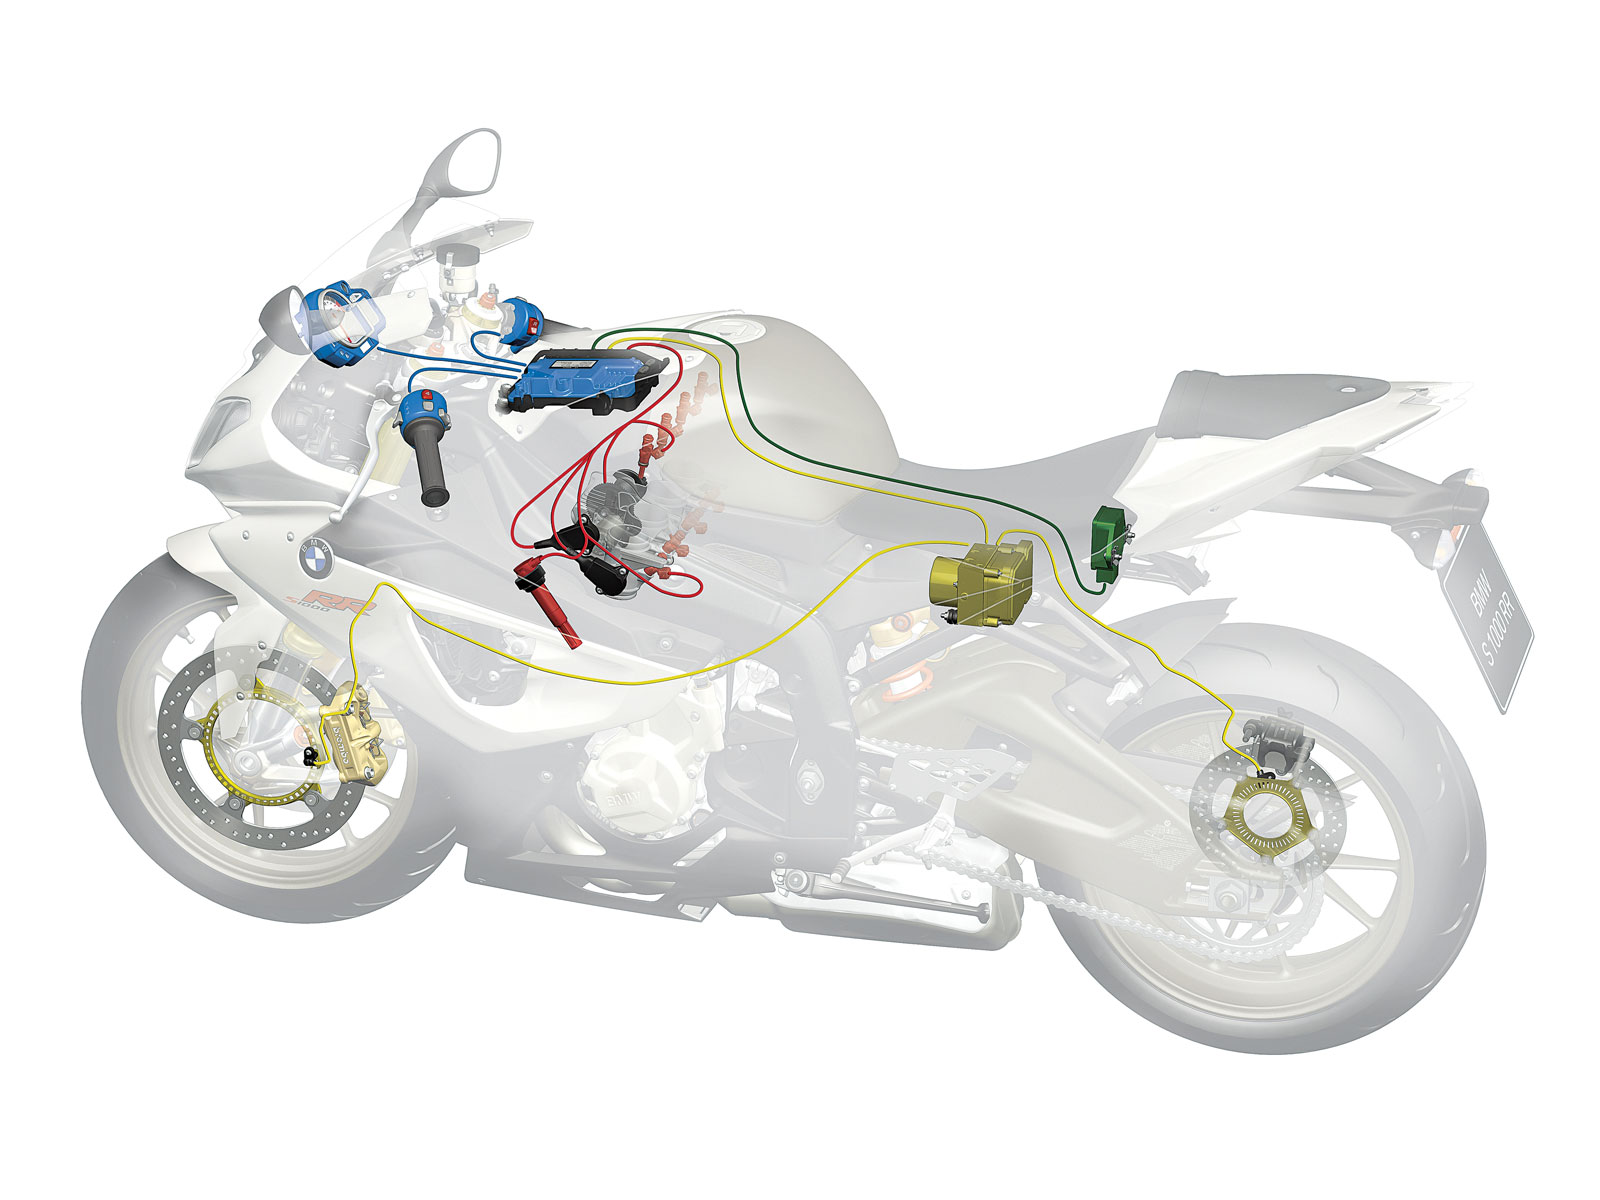 Traction Control system in motorbike